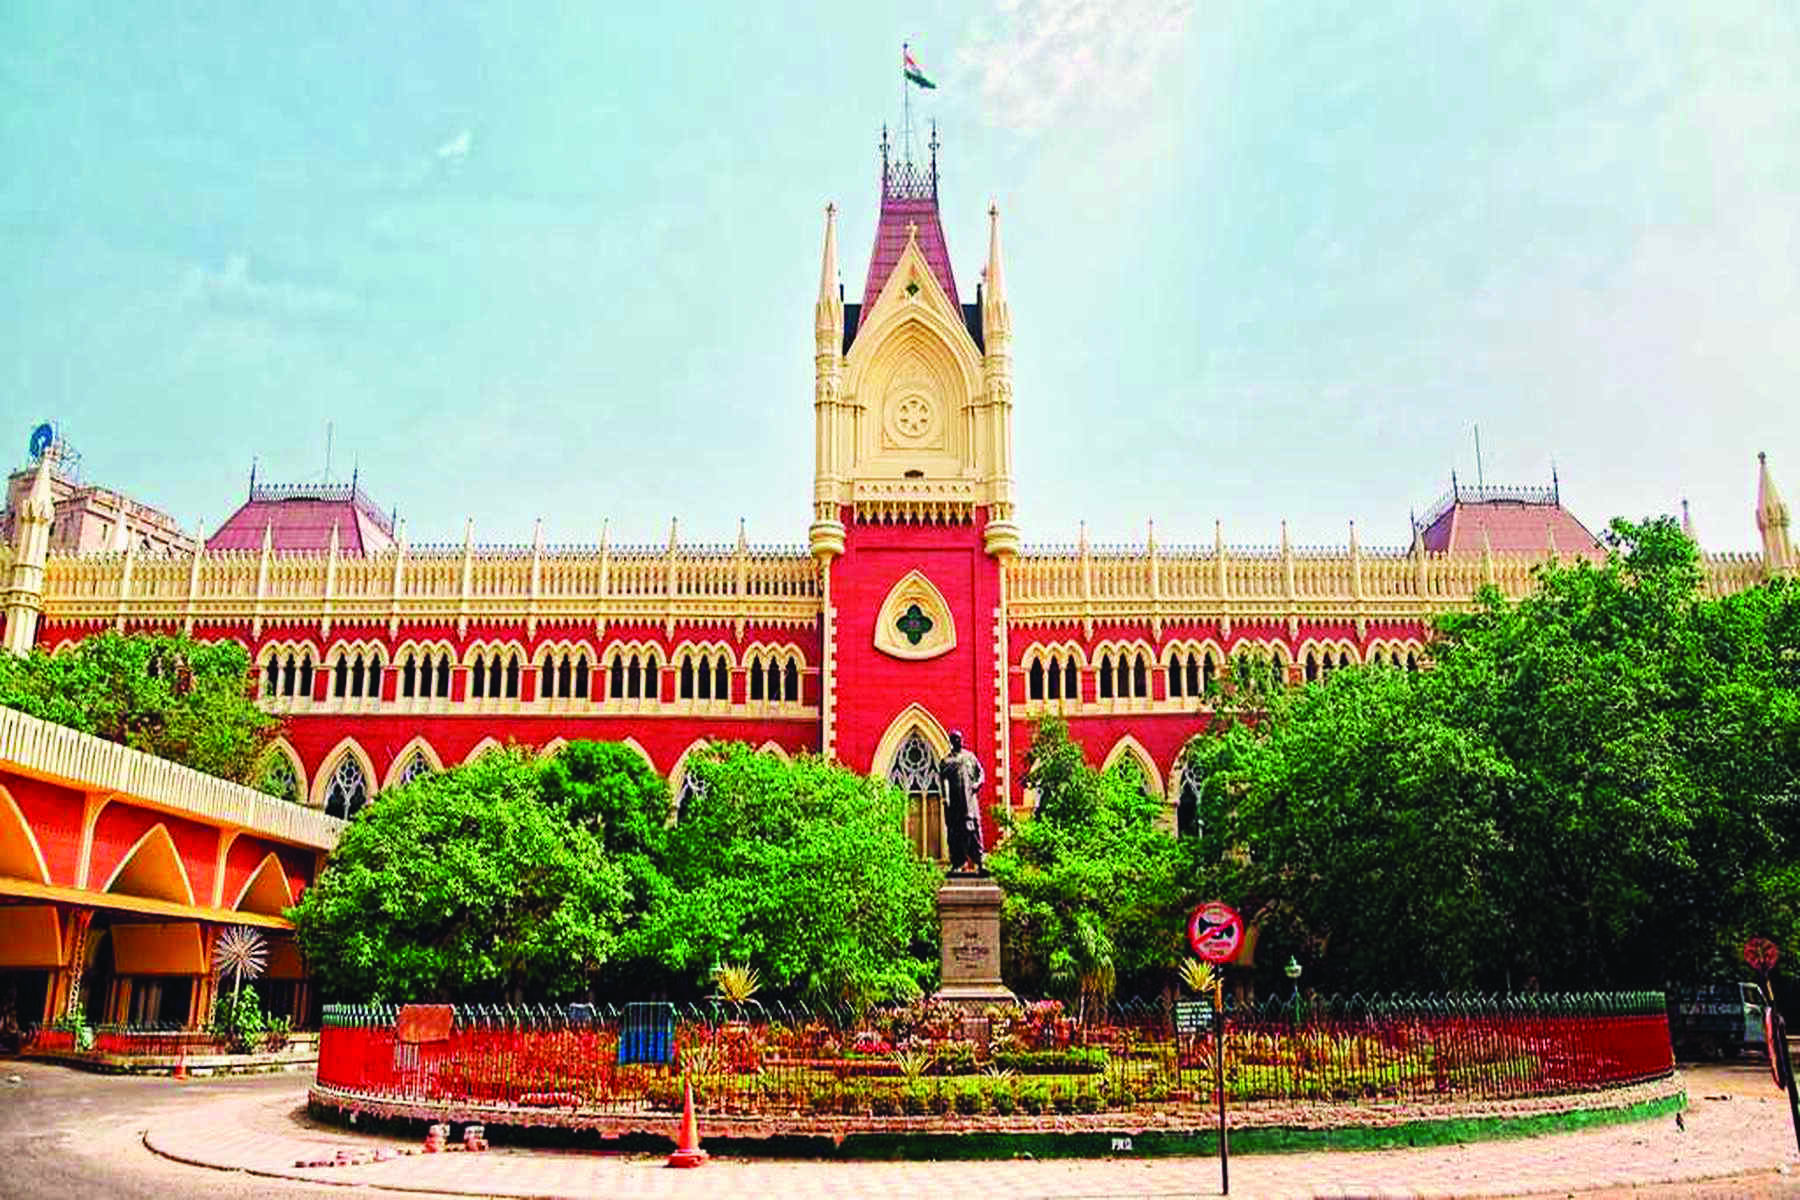 PIL seeking civic polls in one go: HC likely to deliver verdict today